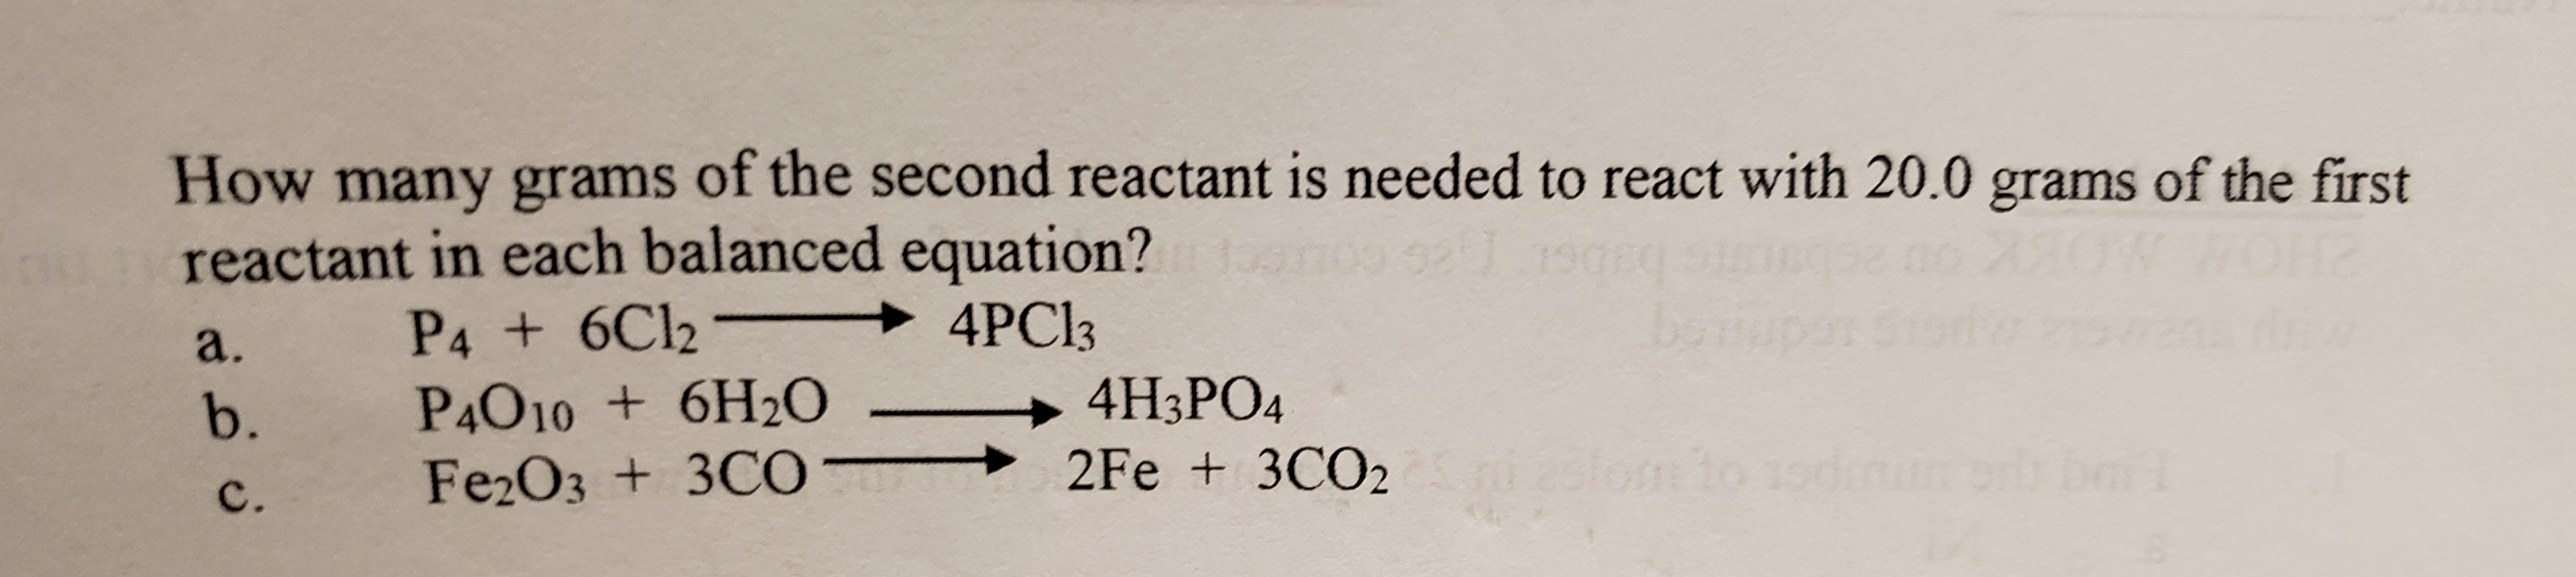 How many grams of the second reactant is needed to react with 20.0 grams of the first
reactant in each balanced equation?
a. P4+6C12 + 4PC13
Fe203 + 3CO
2Fe + 3C02
C.
